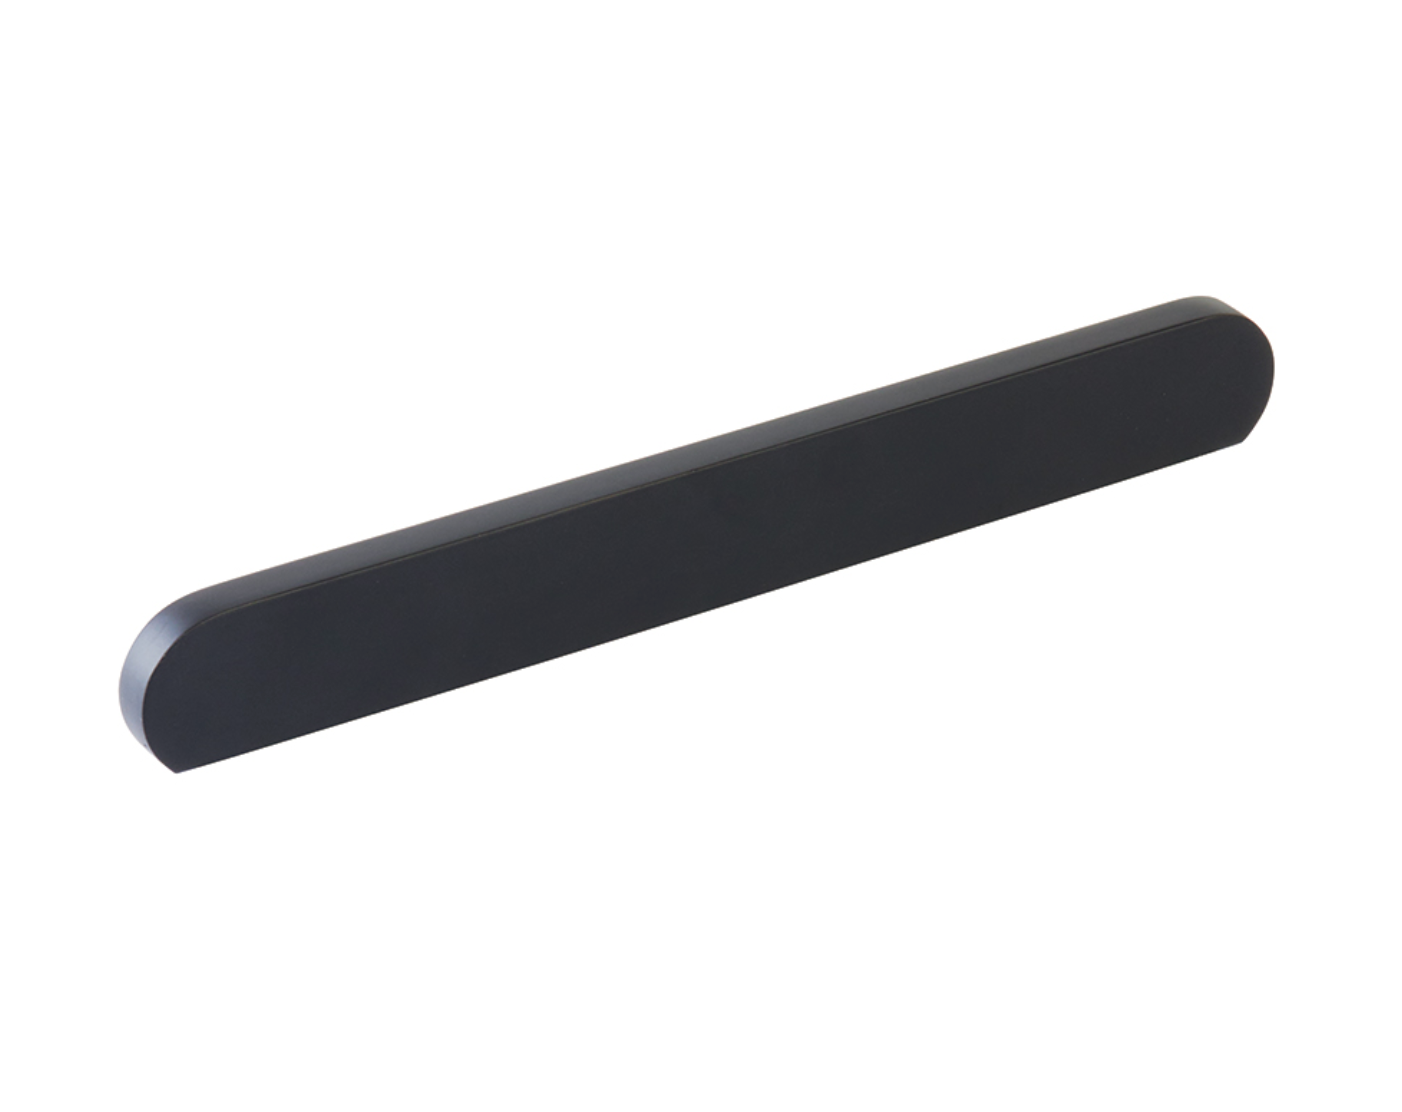 Matte Black "Bit" Rounded Drawer Pulls and Cabinet Knobs